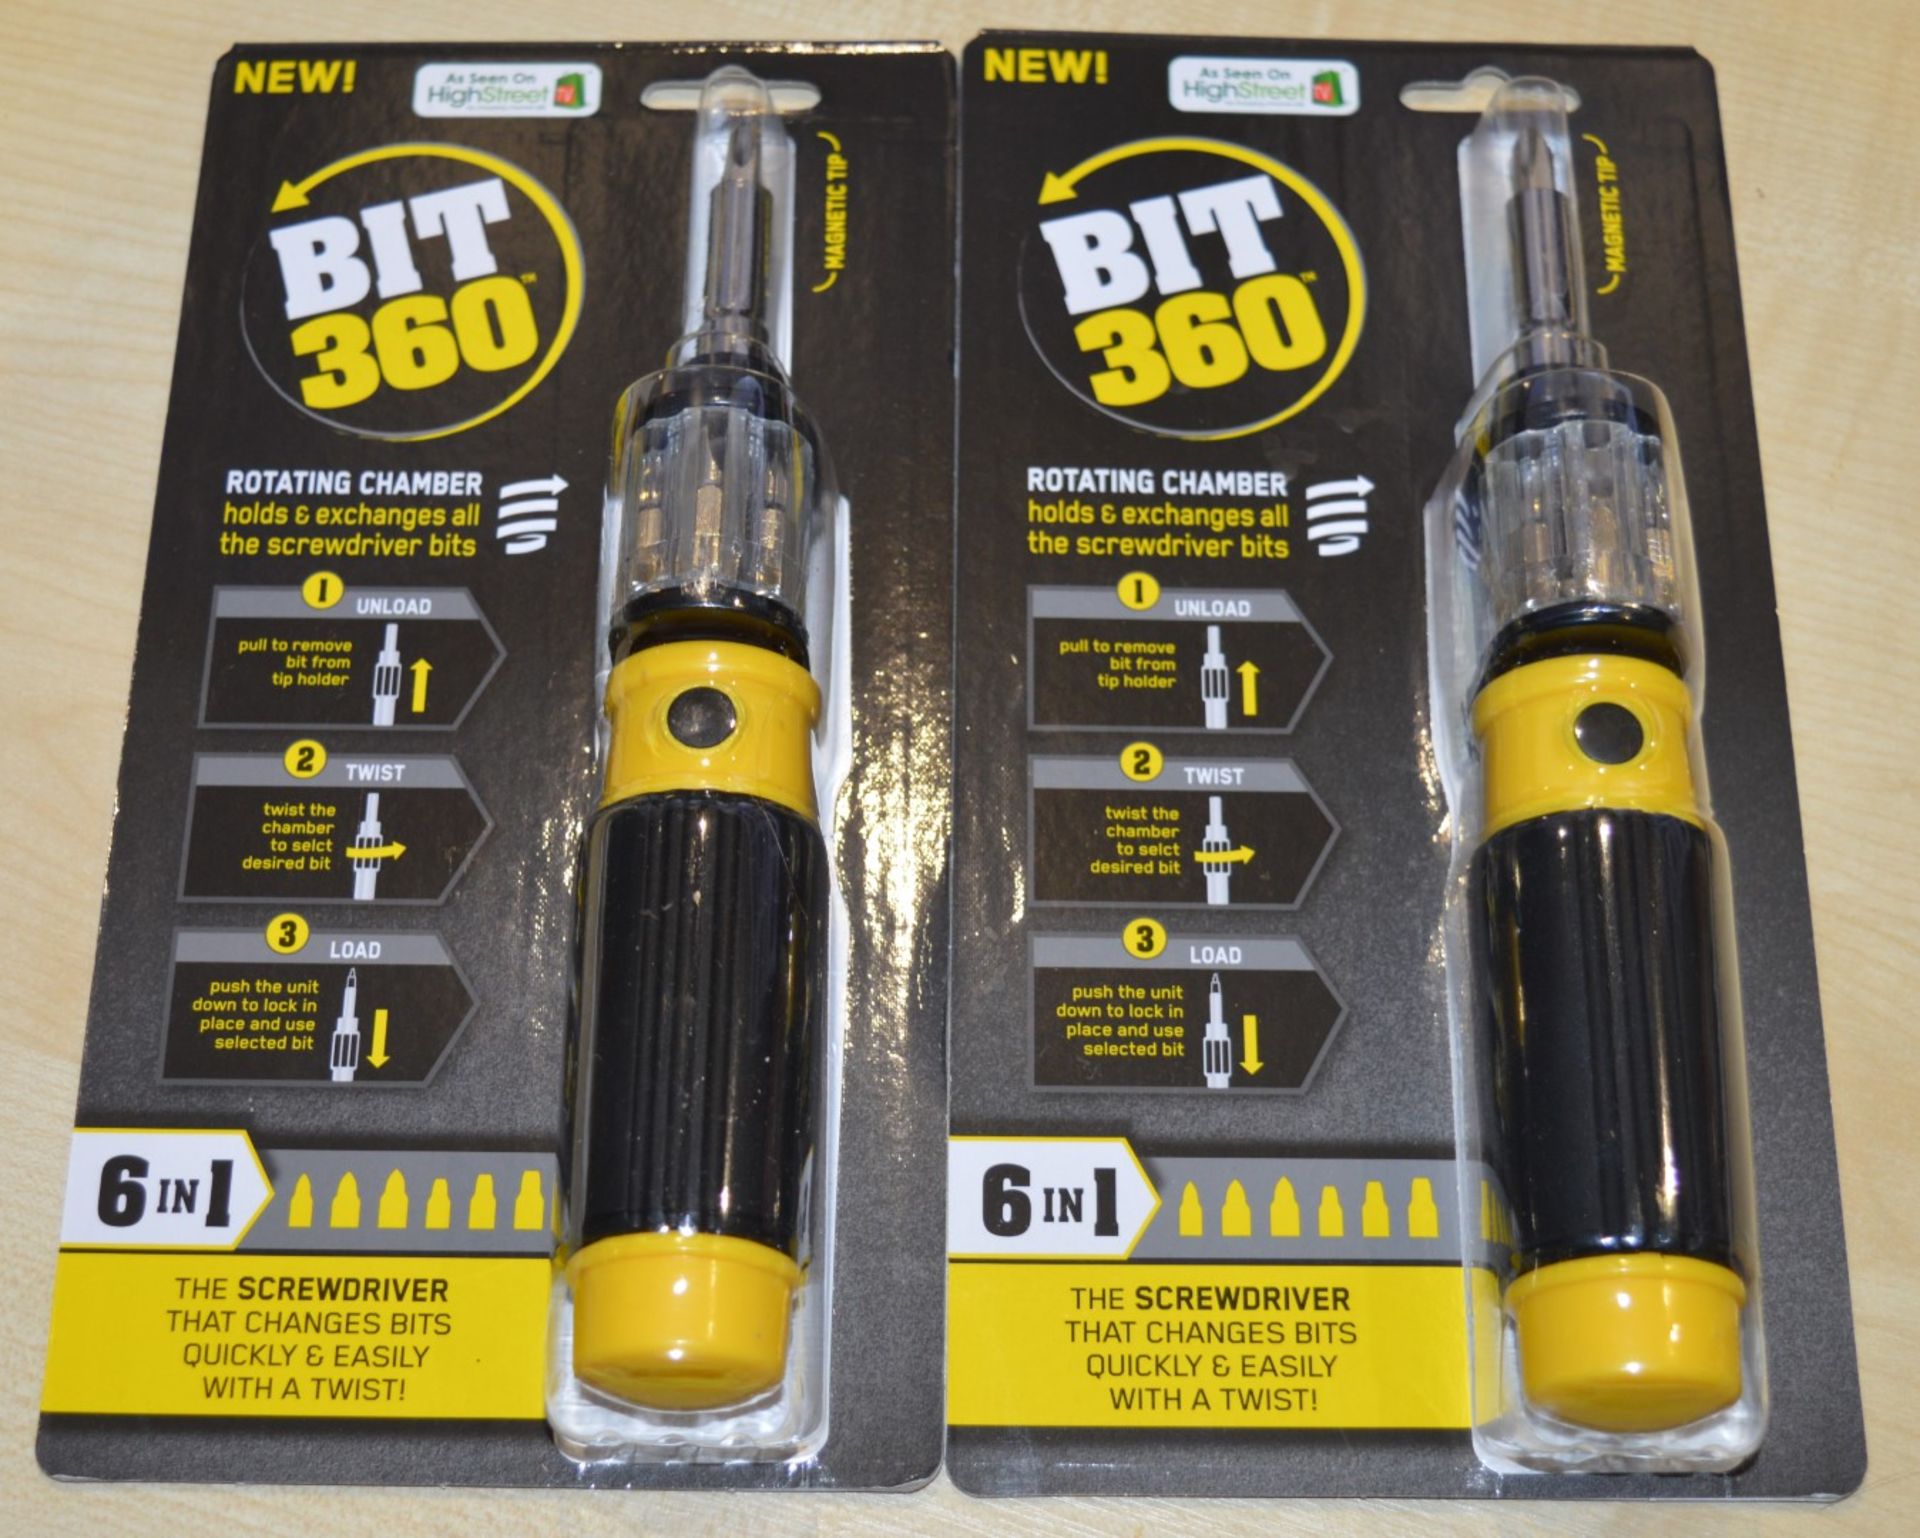 5 x Bit 360 All-in-One Screwdriver and Bit Set - The Screwdrive That Changes Bits Quickly and Easily - Image 4 of 7